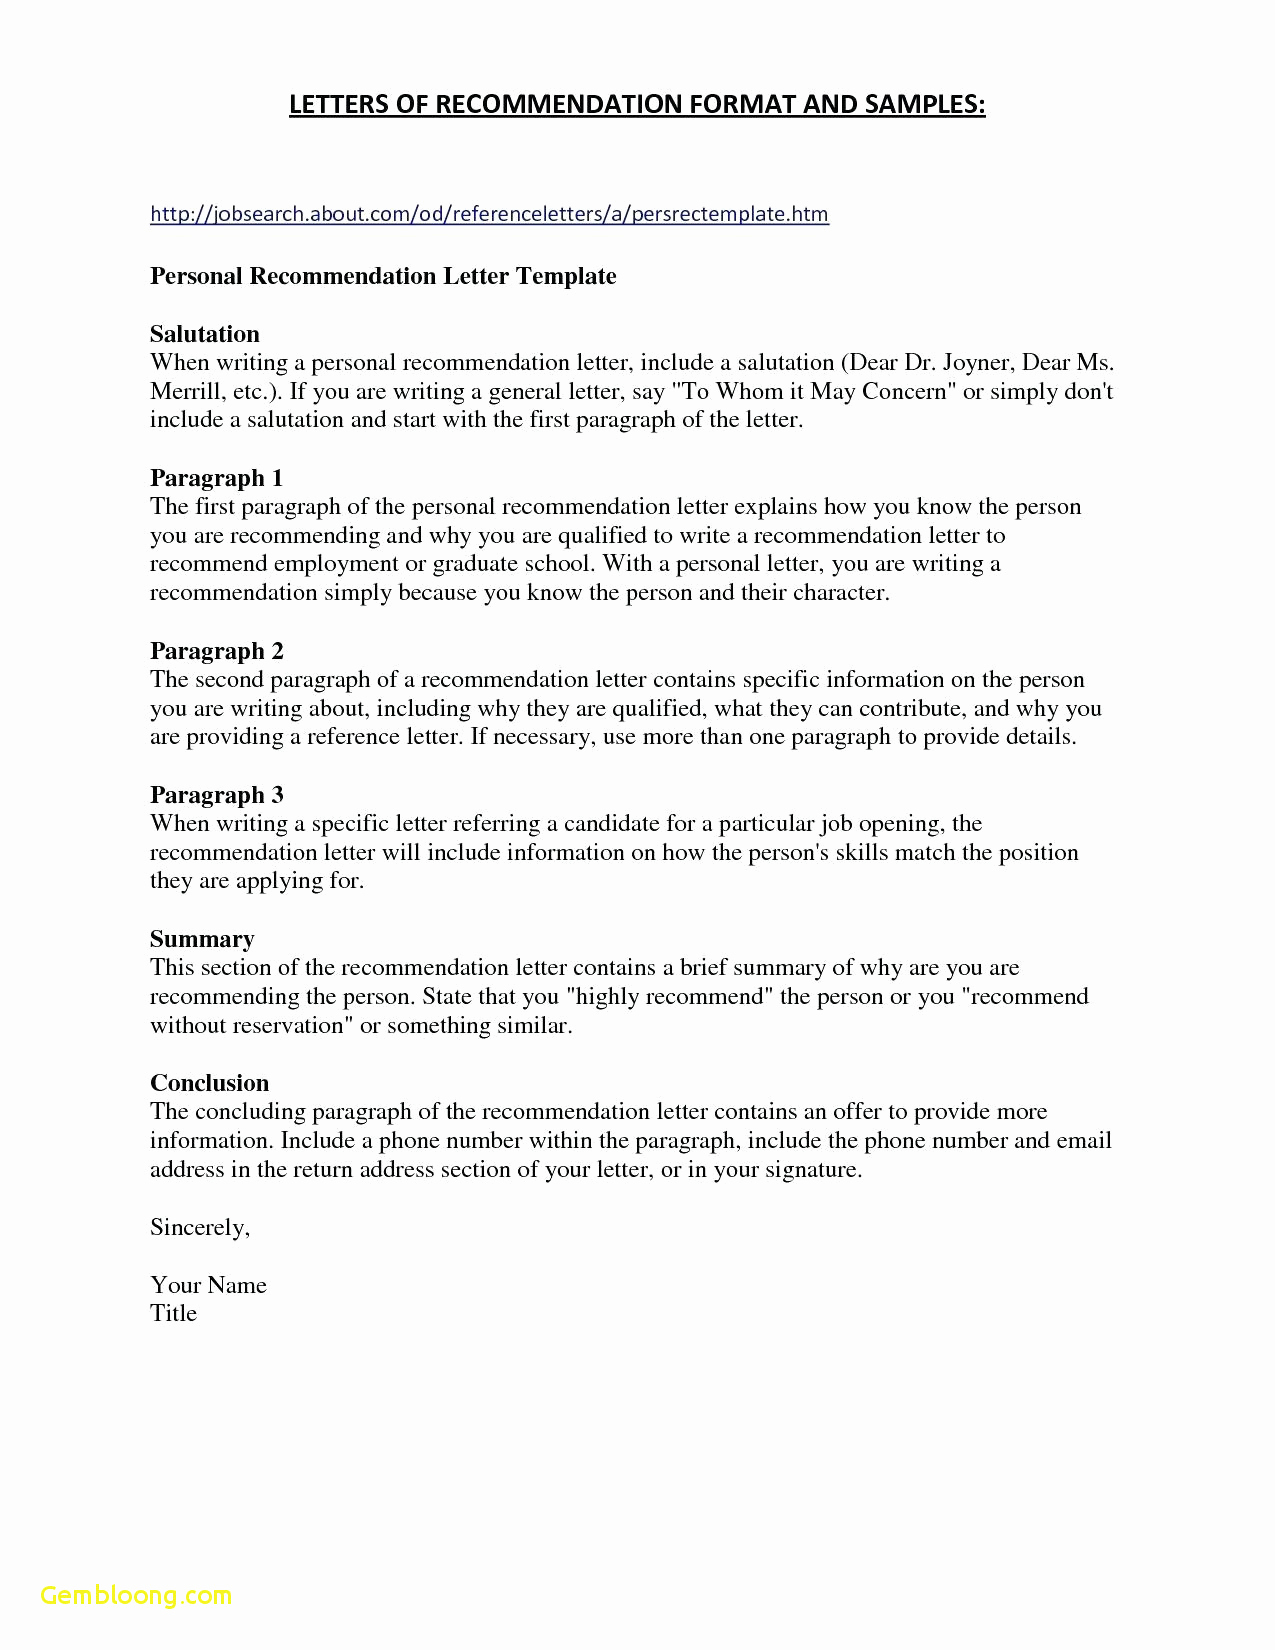 reference letter template Collection-Personal Re mendation Letter for Employment Lovely References for Resume Template New Reference Letter format In Hindi 20-t